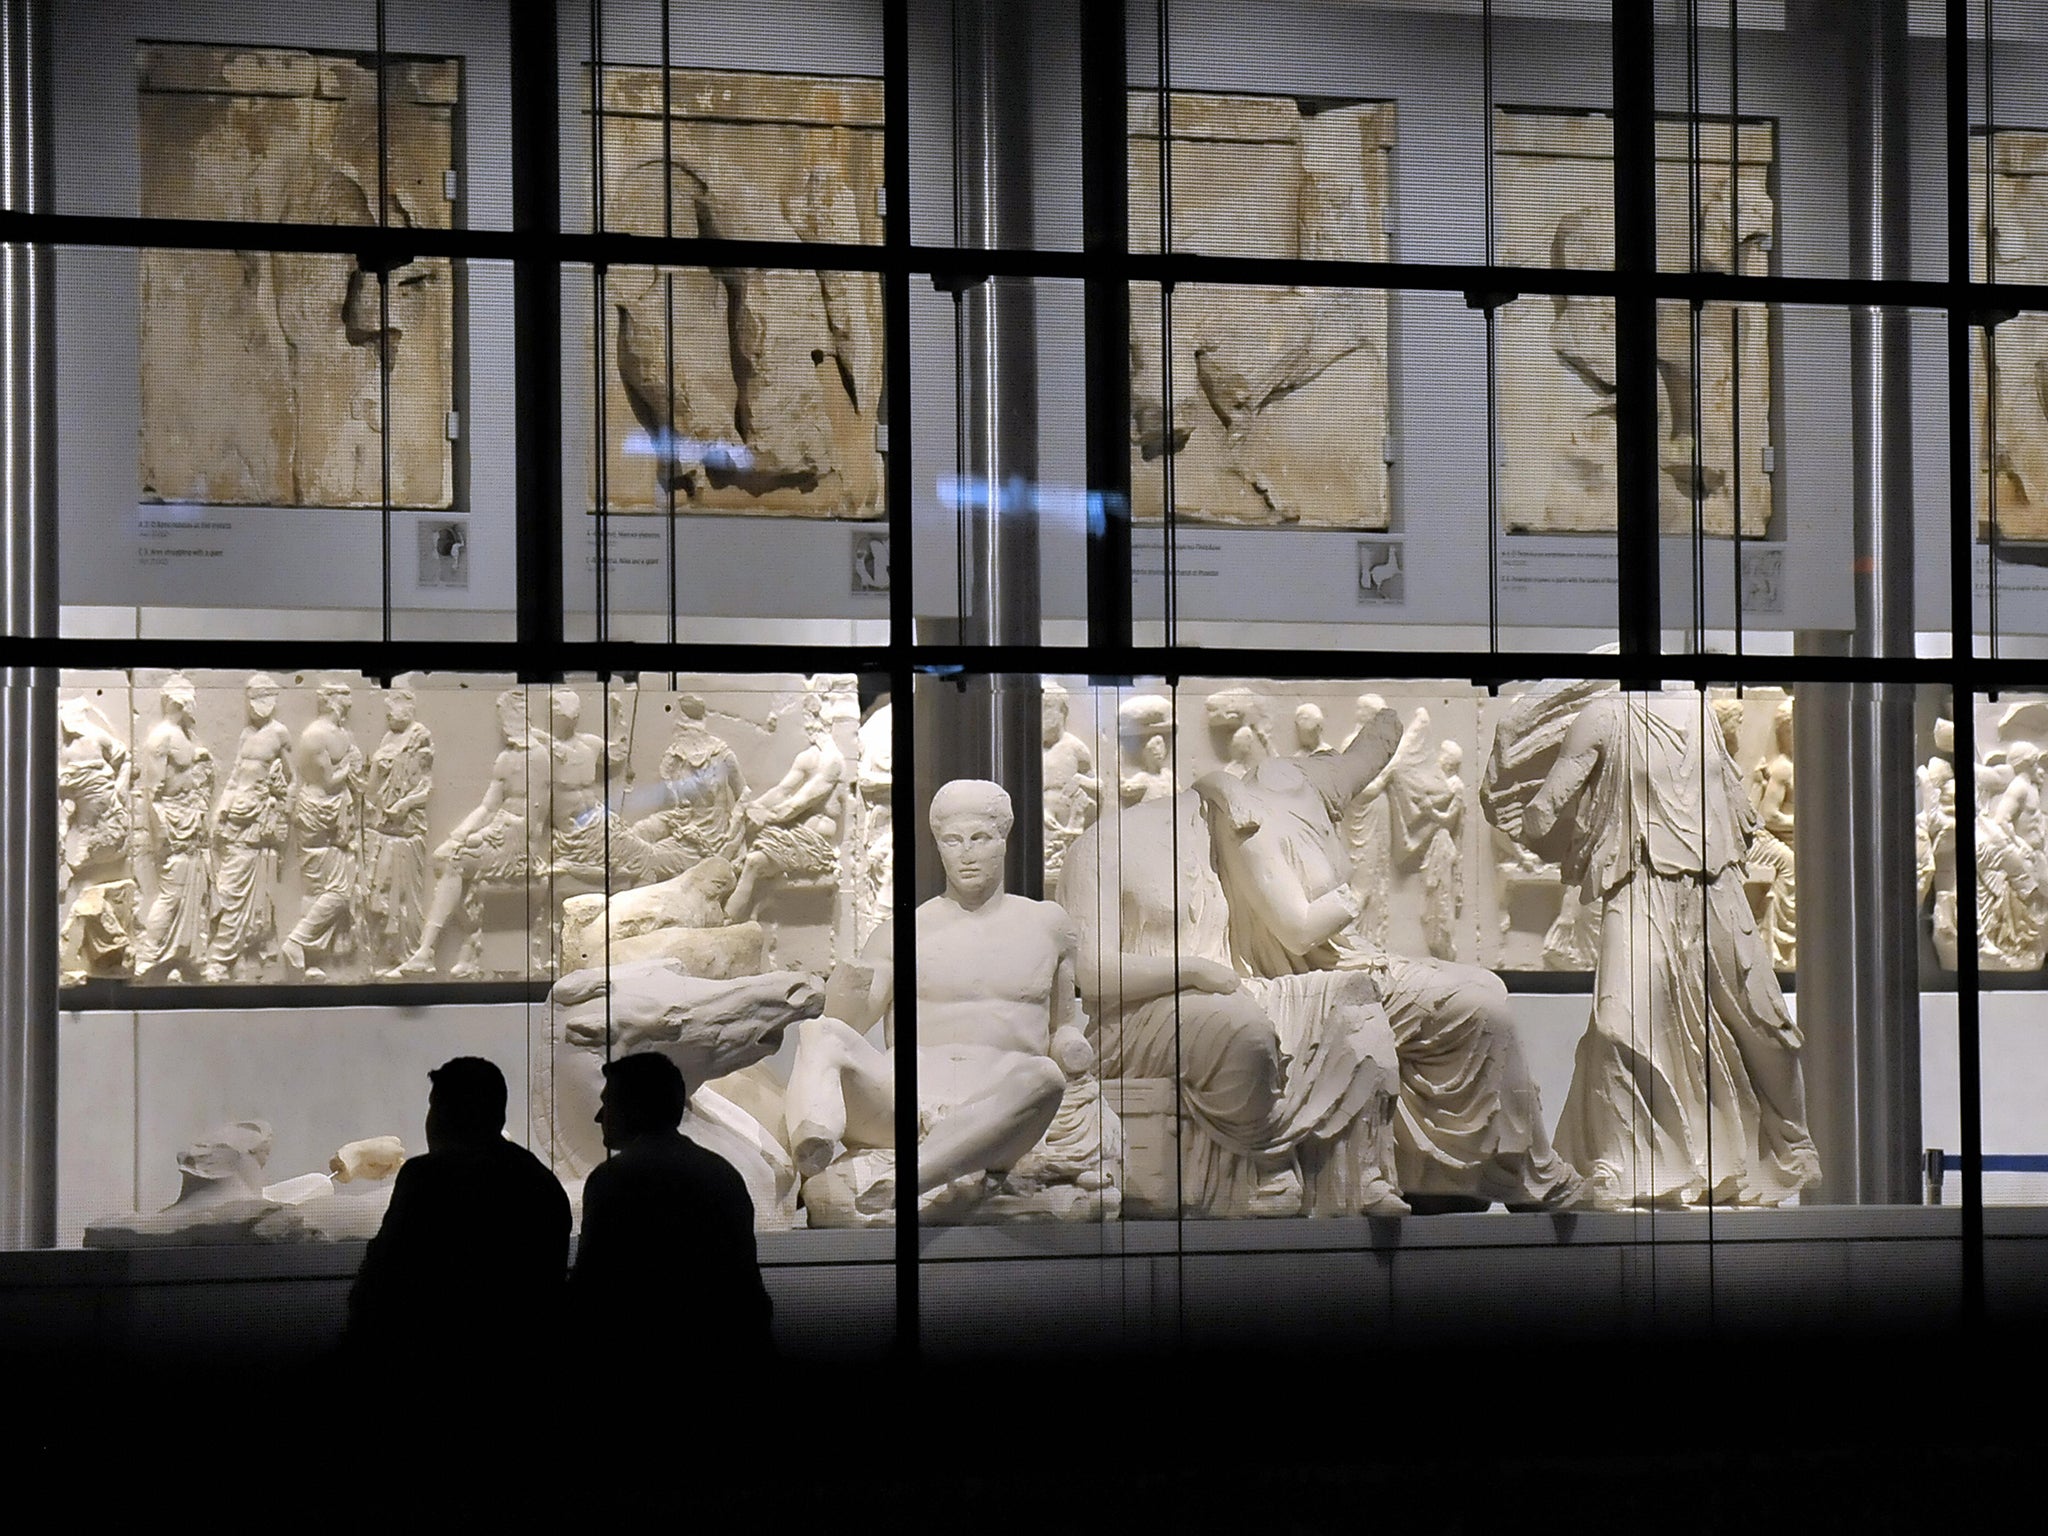 The sculptures have been housed in the British Museum since 1817